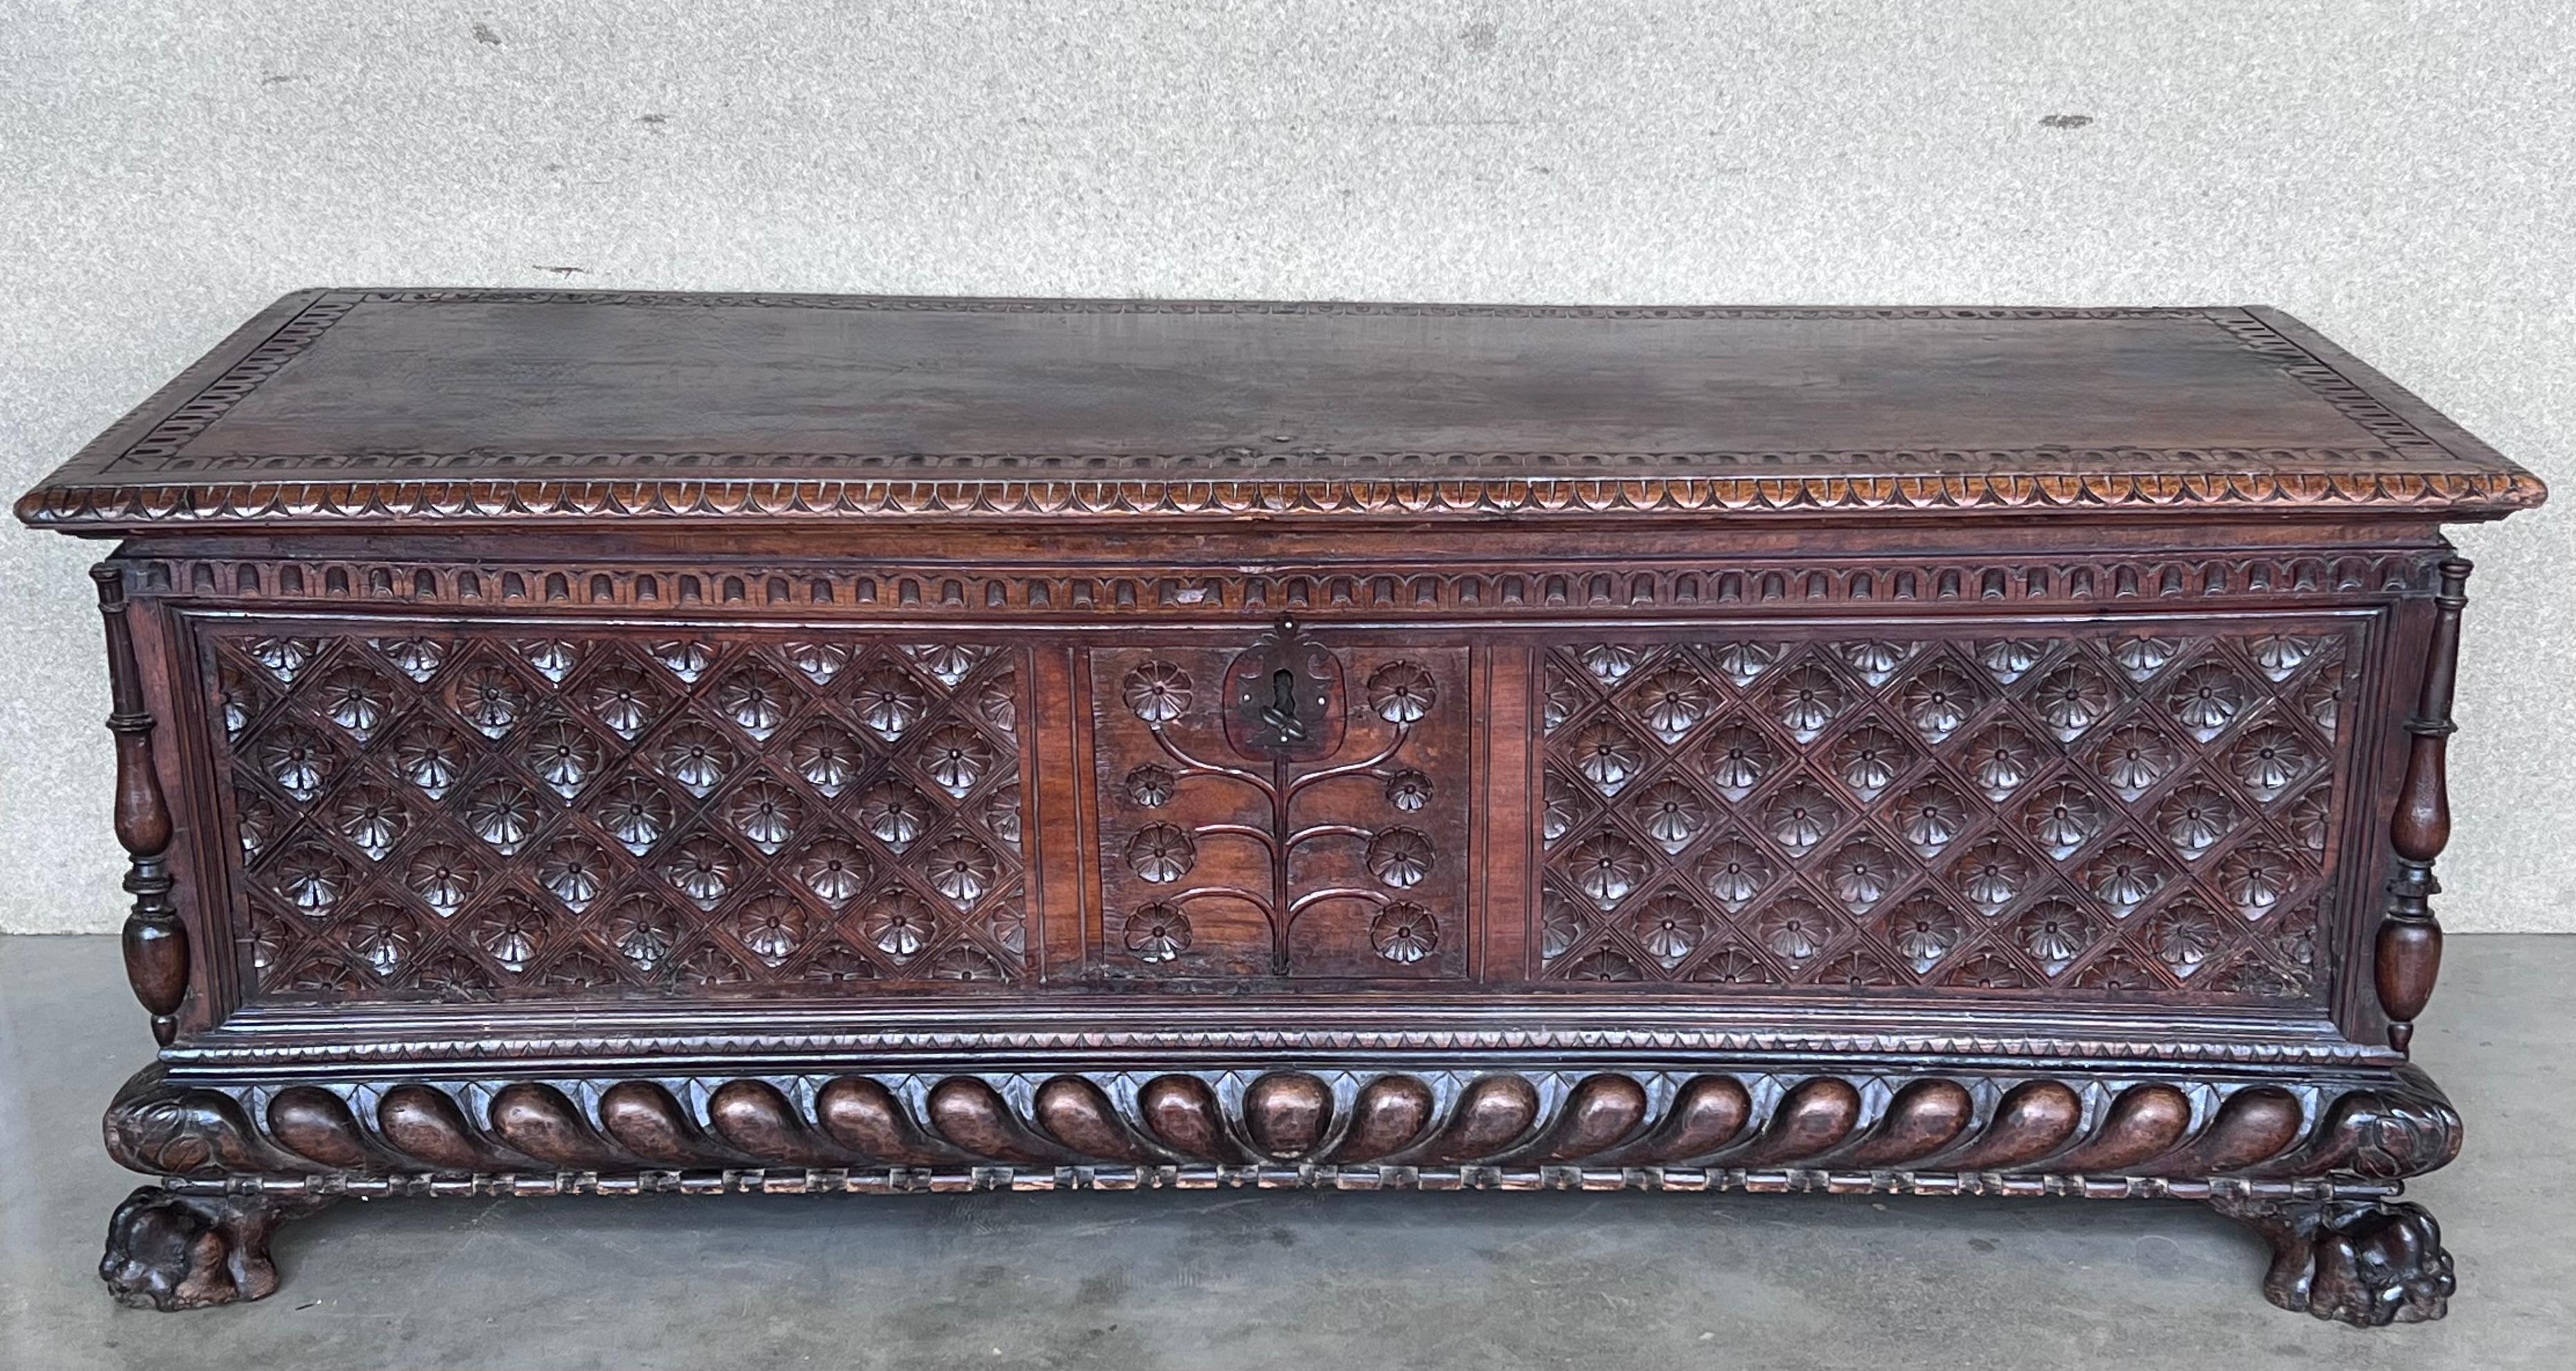 Baroque 17th Century Italian Carved Cassone Trunk with Original Hardware For Sale